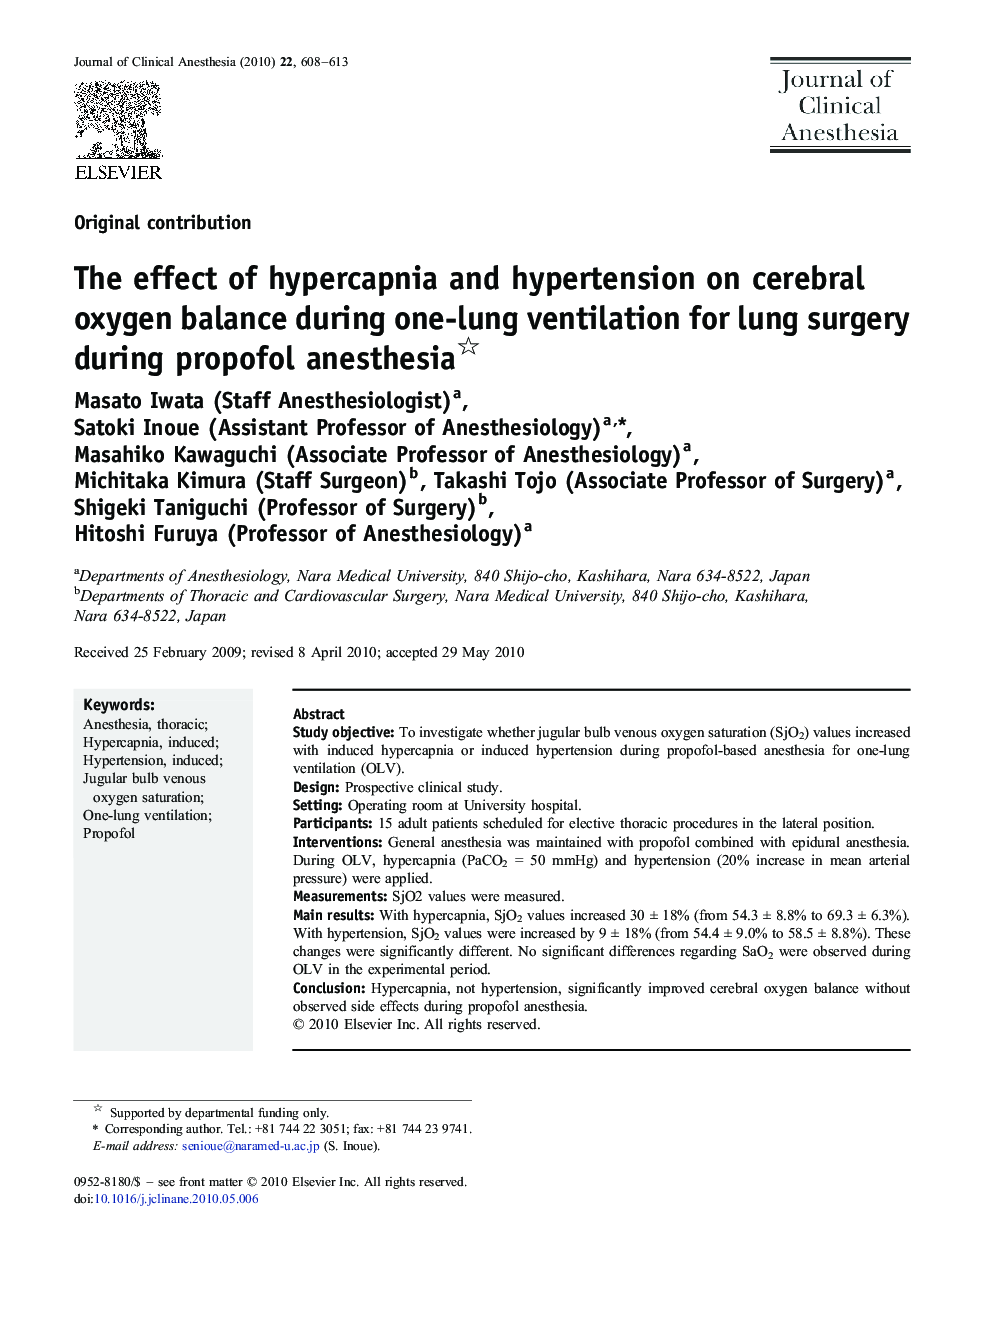 The effect of hypercapnia and hypertension on cerebral oxygen balance during one-lung ventilation for lung surgery during propofol anesthesia 